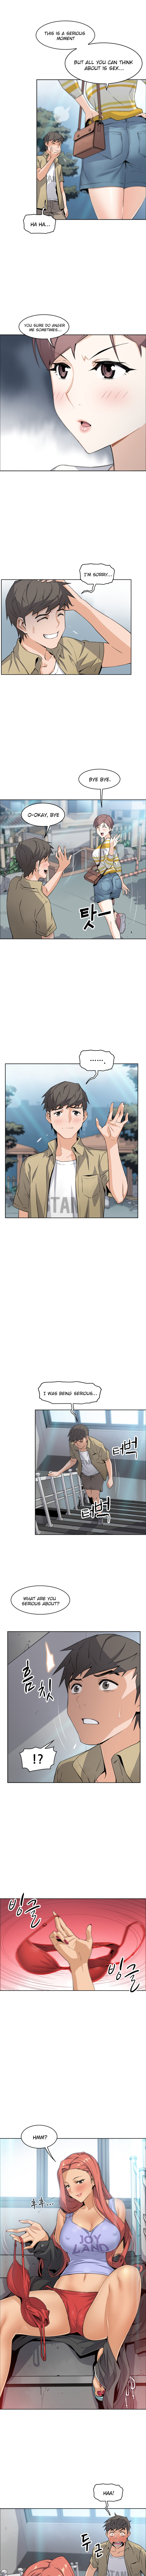 Housekeeper Manhwa - Chapter 3 Page 6